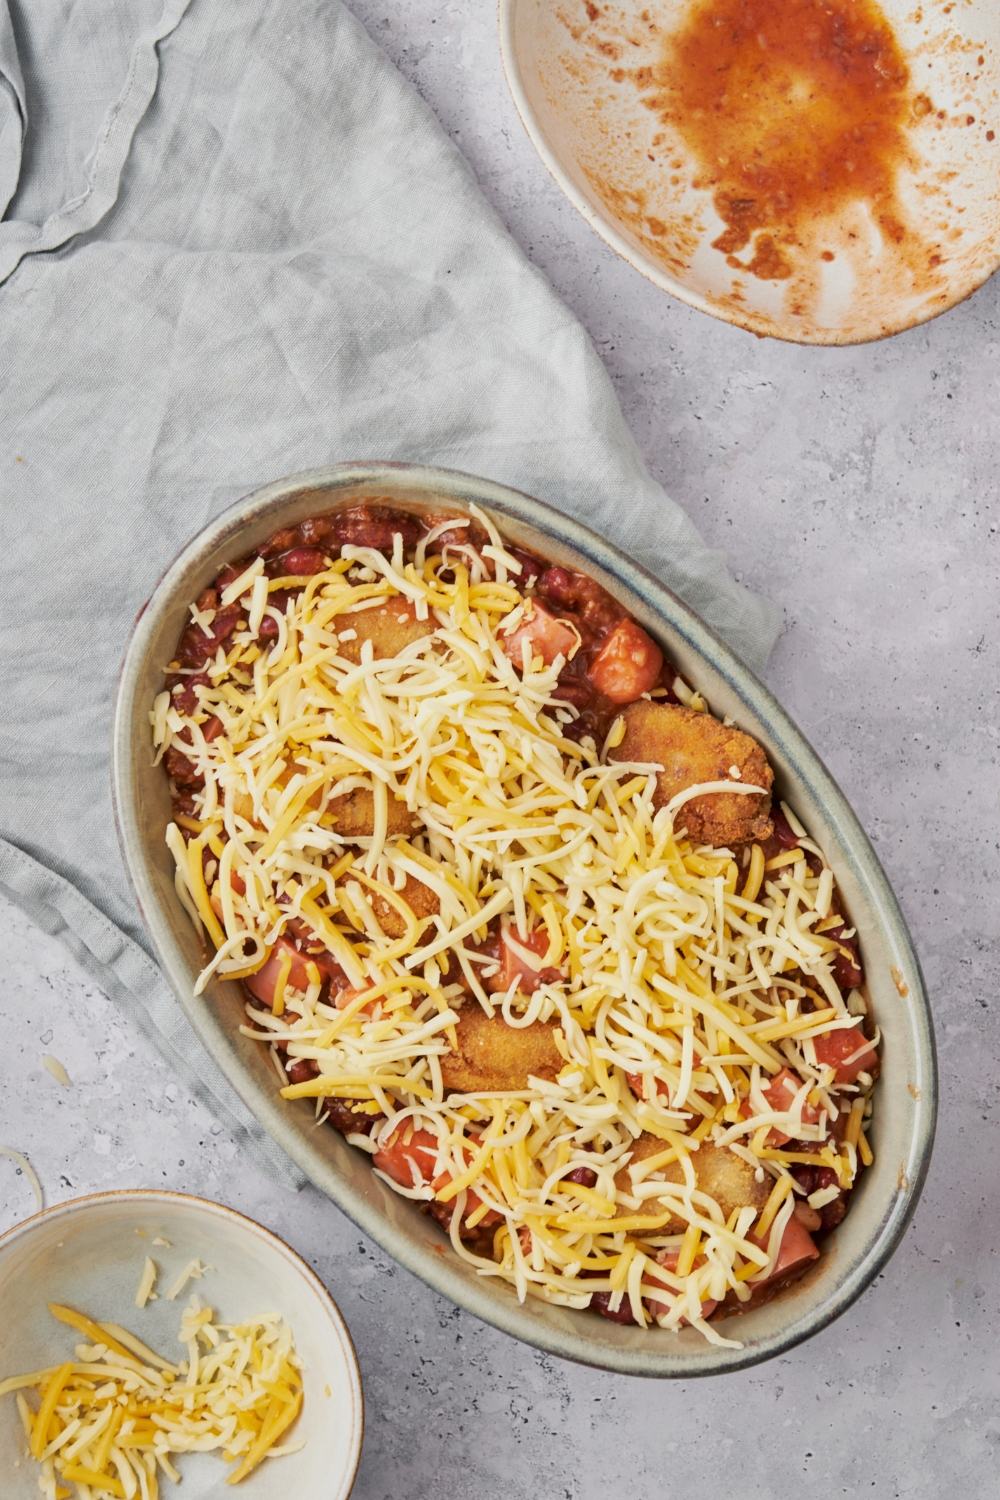 A baking dish filled with hot dog casserole covered in tater tots and shredded cheese on top.